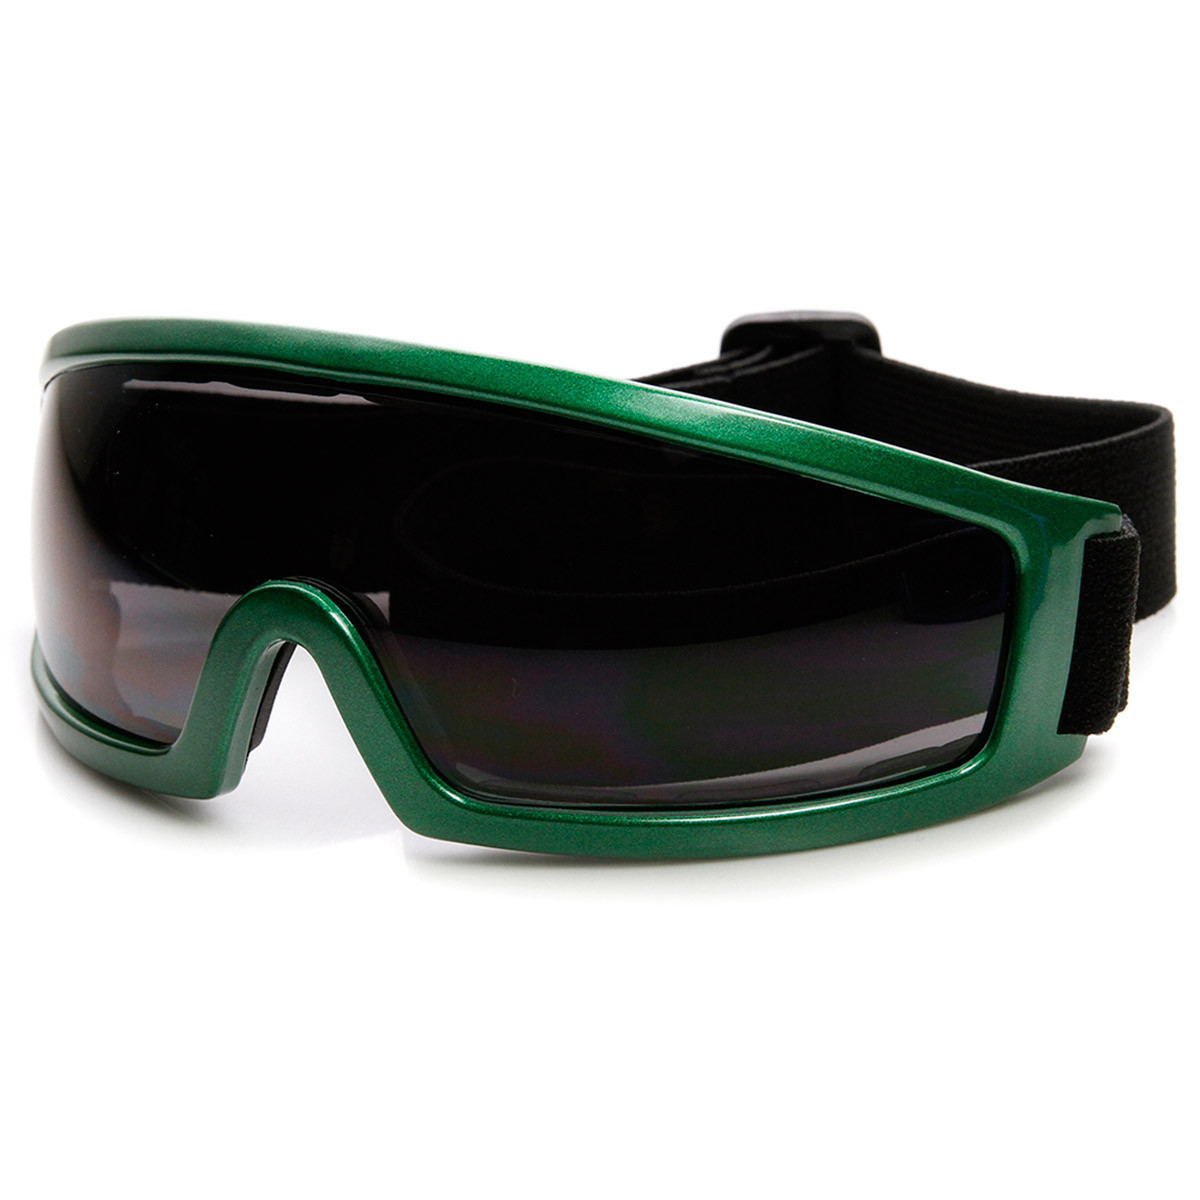 Multi-Purpose Adjustable Strap Safety Shield Lens Sports Goggles - 9275 - Green